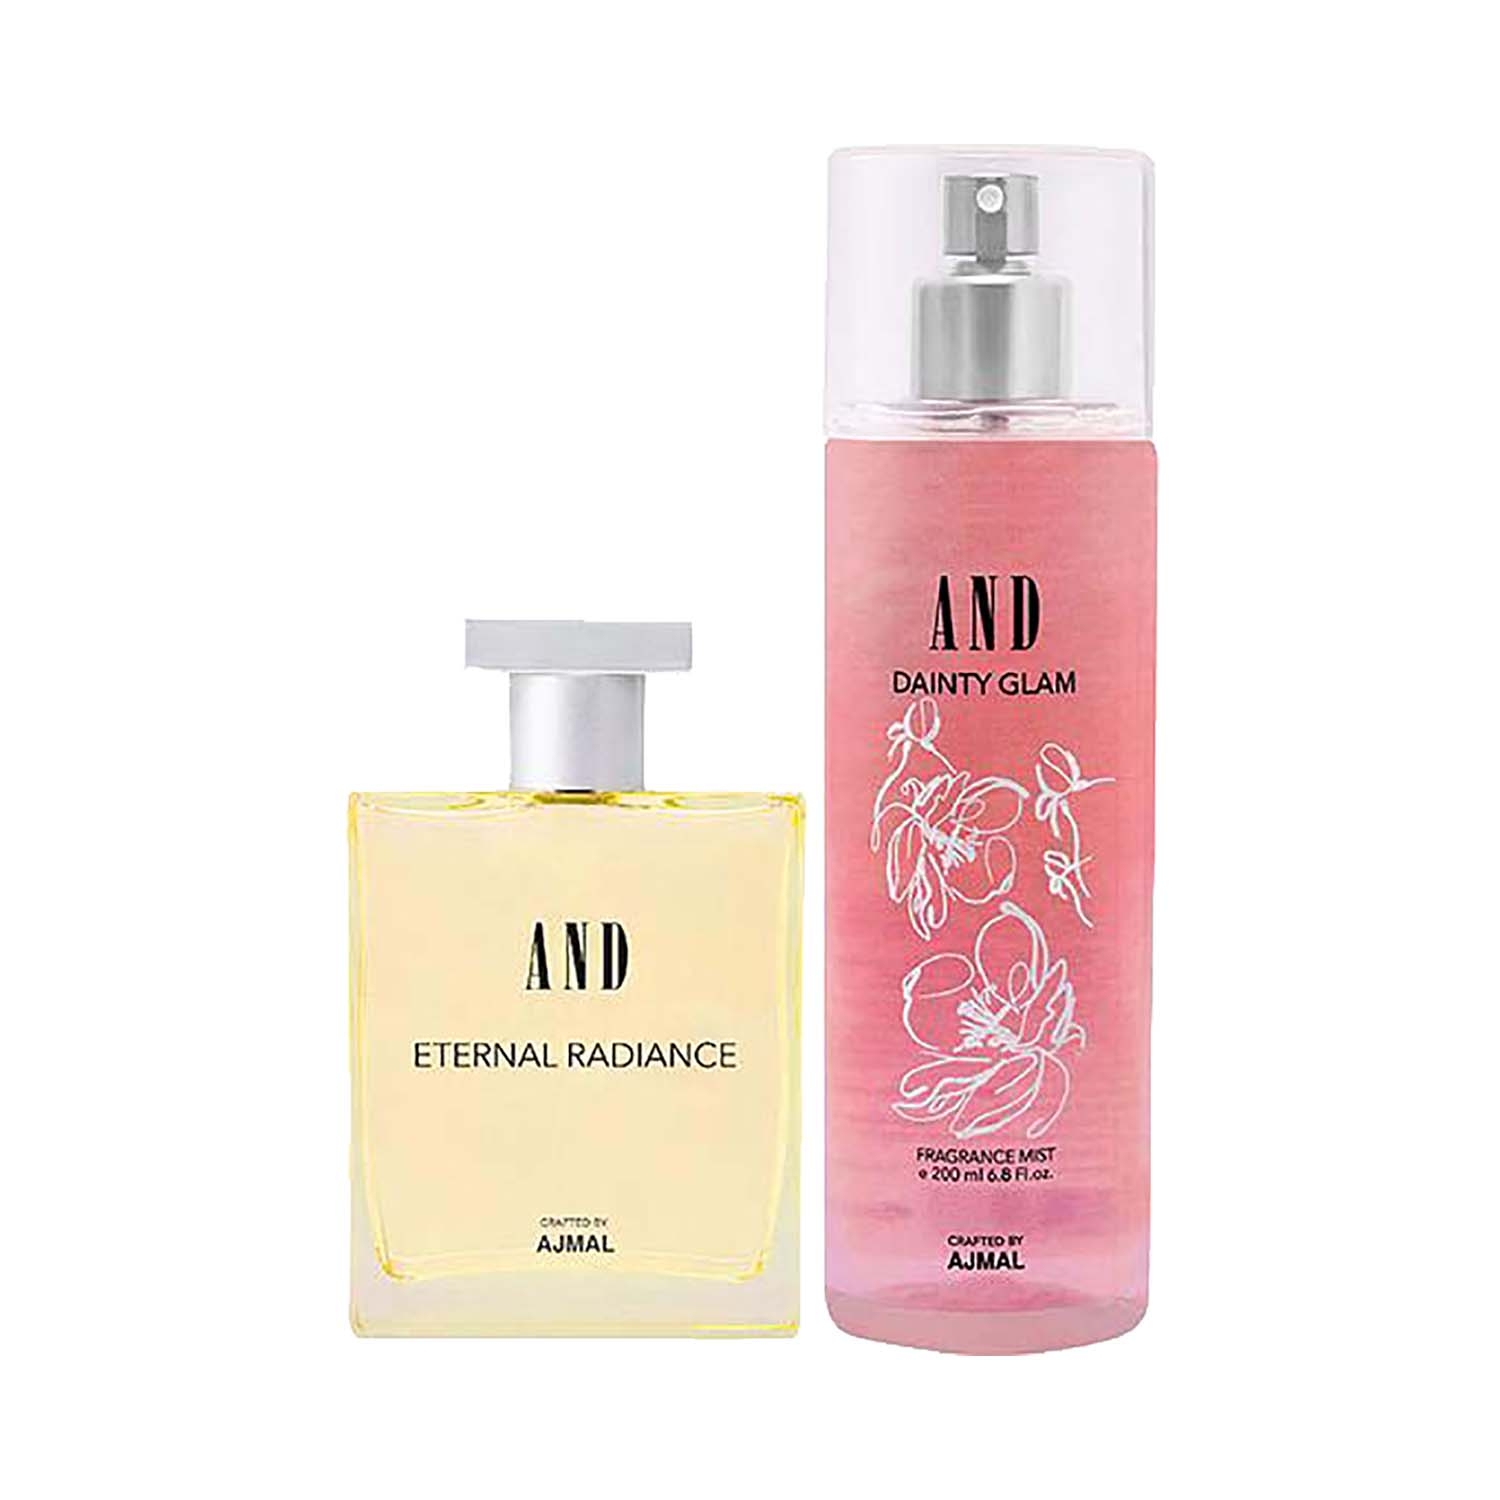 AND | AND Eternal Radiance Eau De Parfum & Dainty Glam Body Mist (250 ml) - (Pack Of 2)